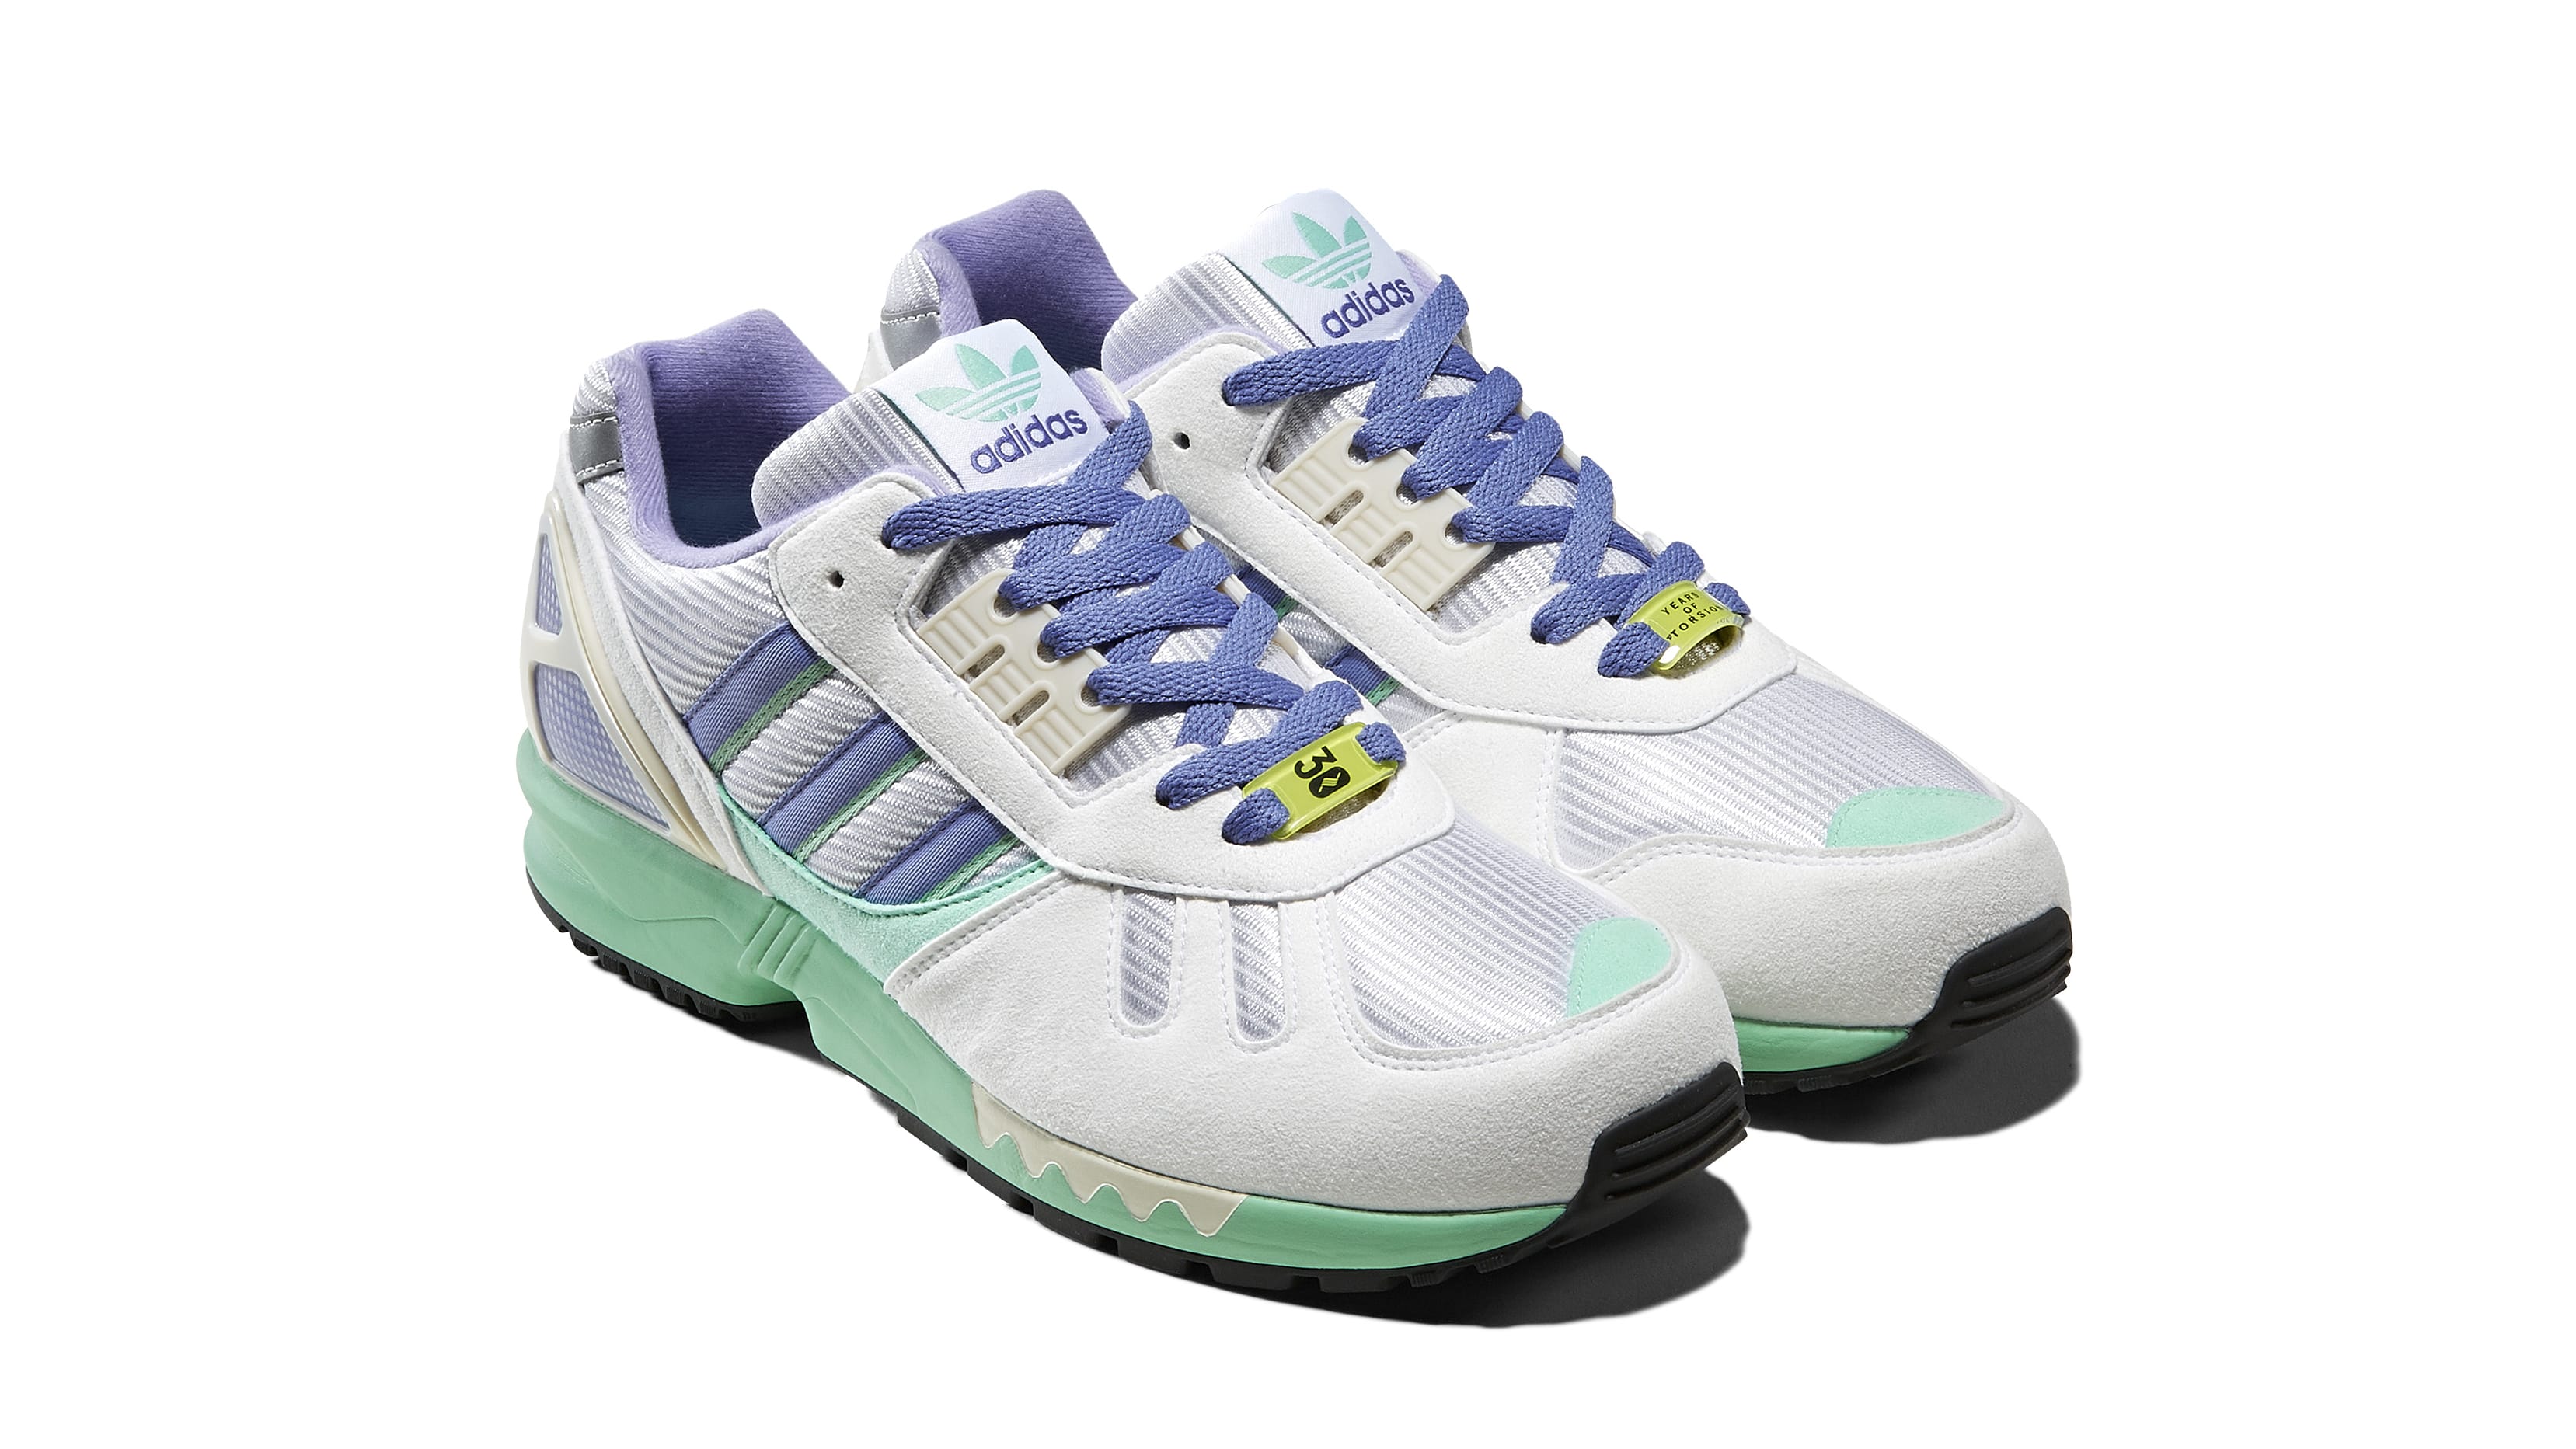 Adidas Celebrates Its ZX Series With the '30 Years of Torsion 